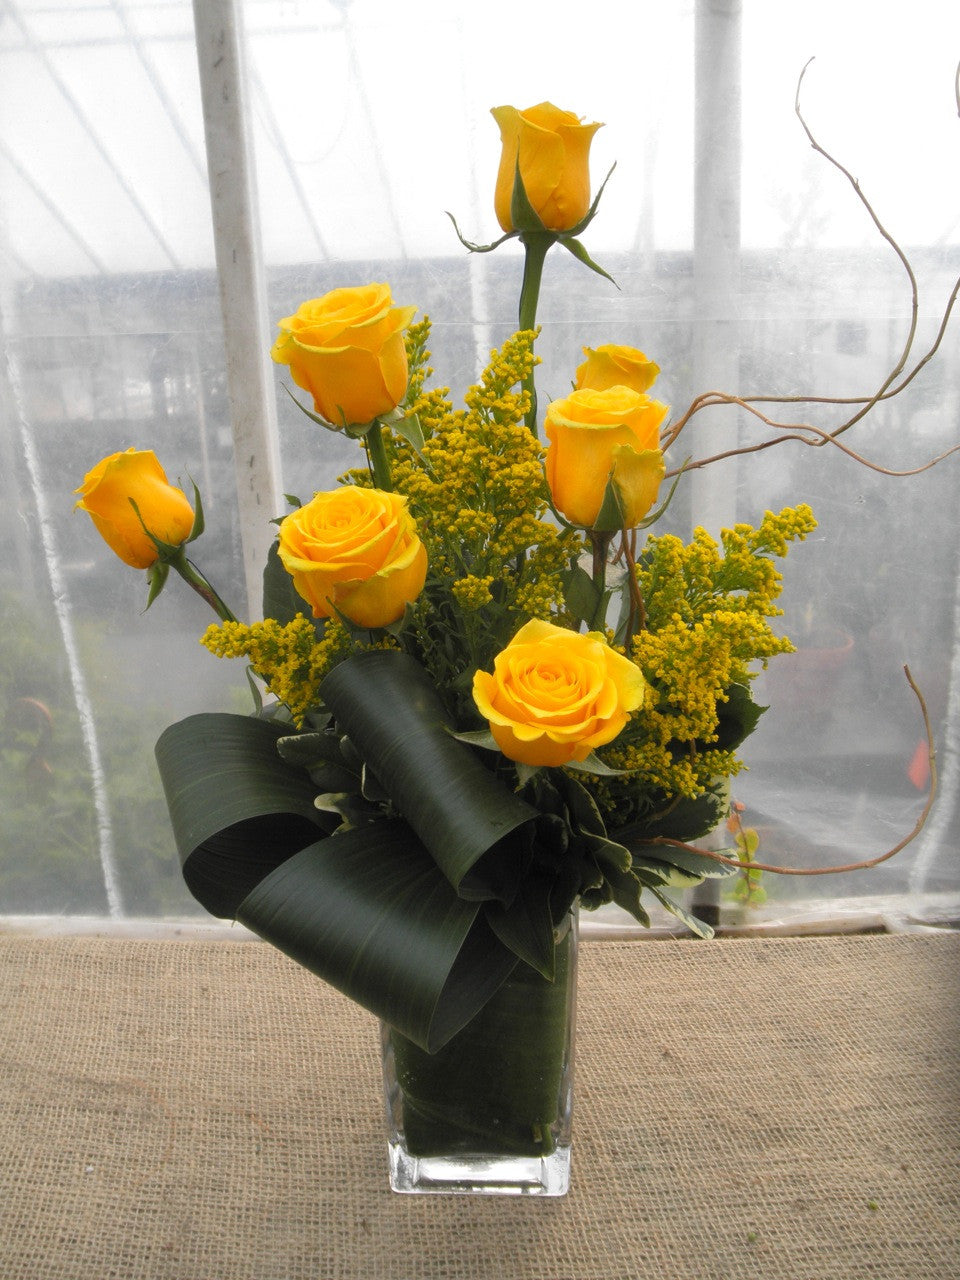 Kenton: Flower arrangement with yellow Roses and Solidago. Designed by Michler's Florist in Lexington, KY